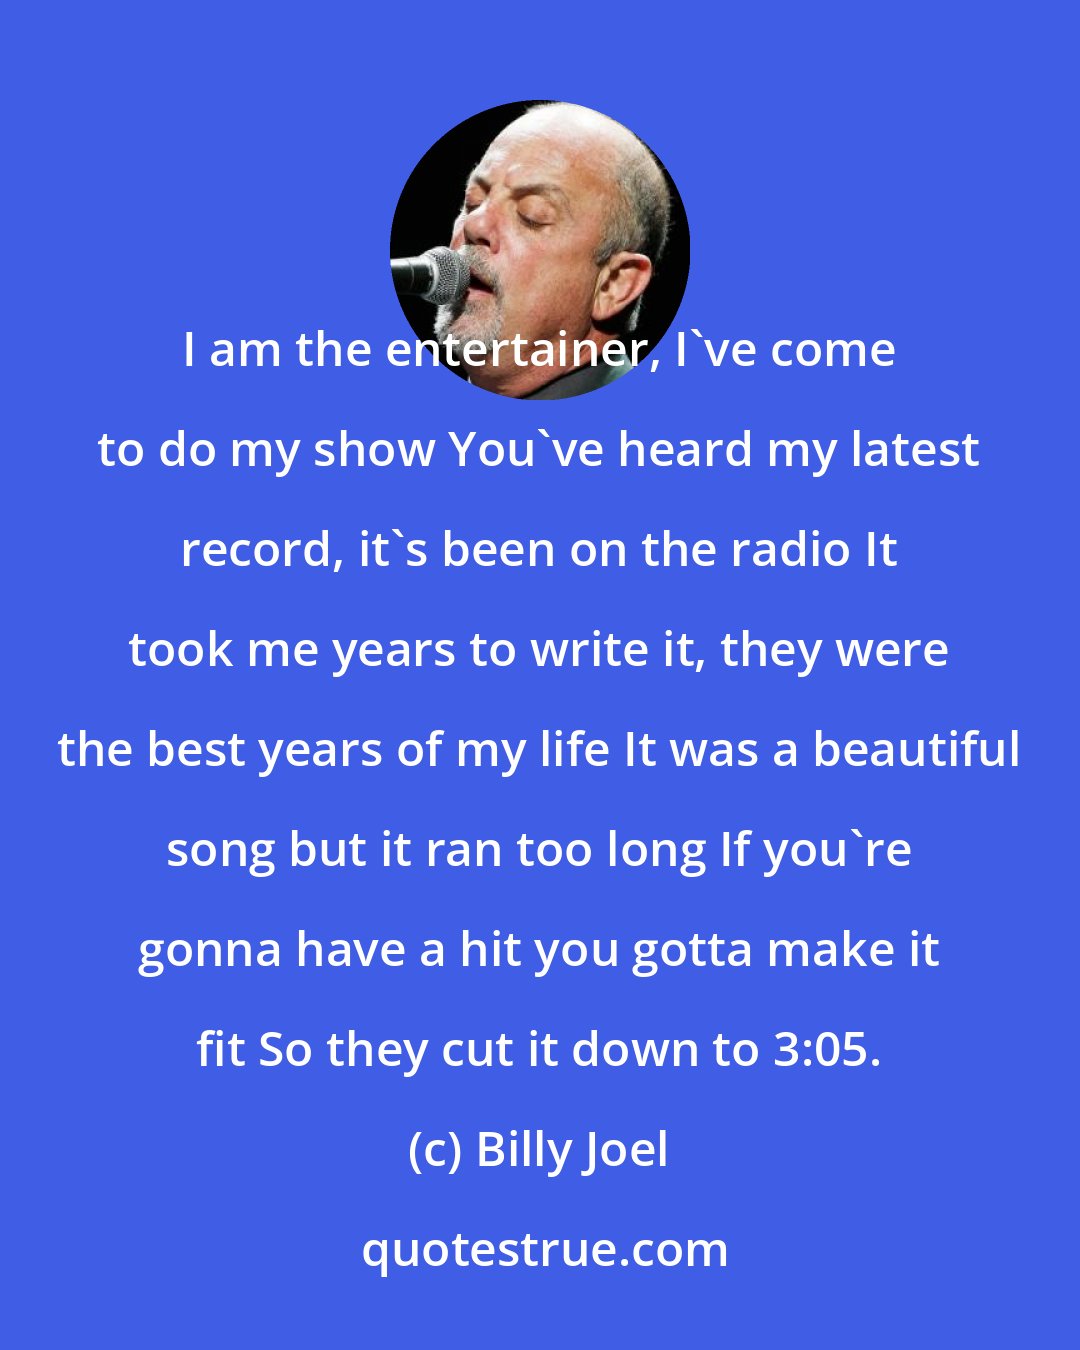 Billy Joel: I am the entertainer, I've come to do my show You've heard my latest record, it's been on the radio It took me years to write it, they were the best years of my life It was a beautiful song but it ran too long If you're gonna have a hit you gotta make it fit So they cut it down to 3:05.